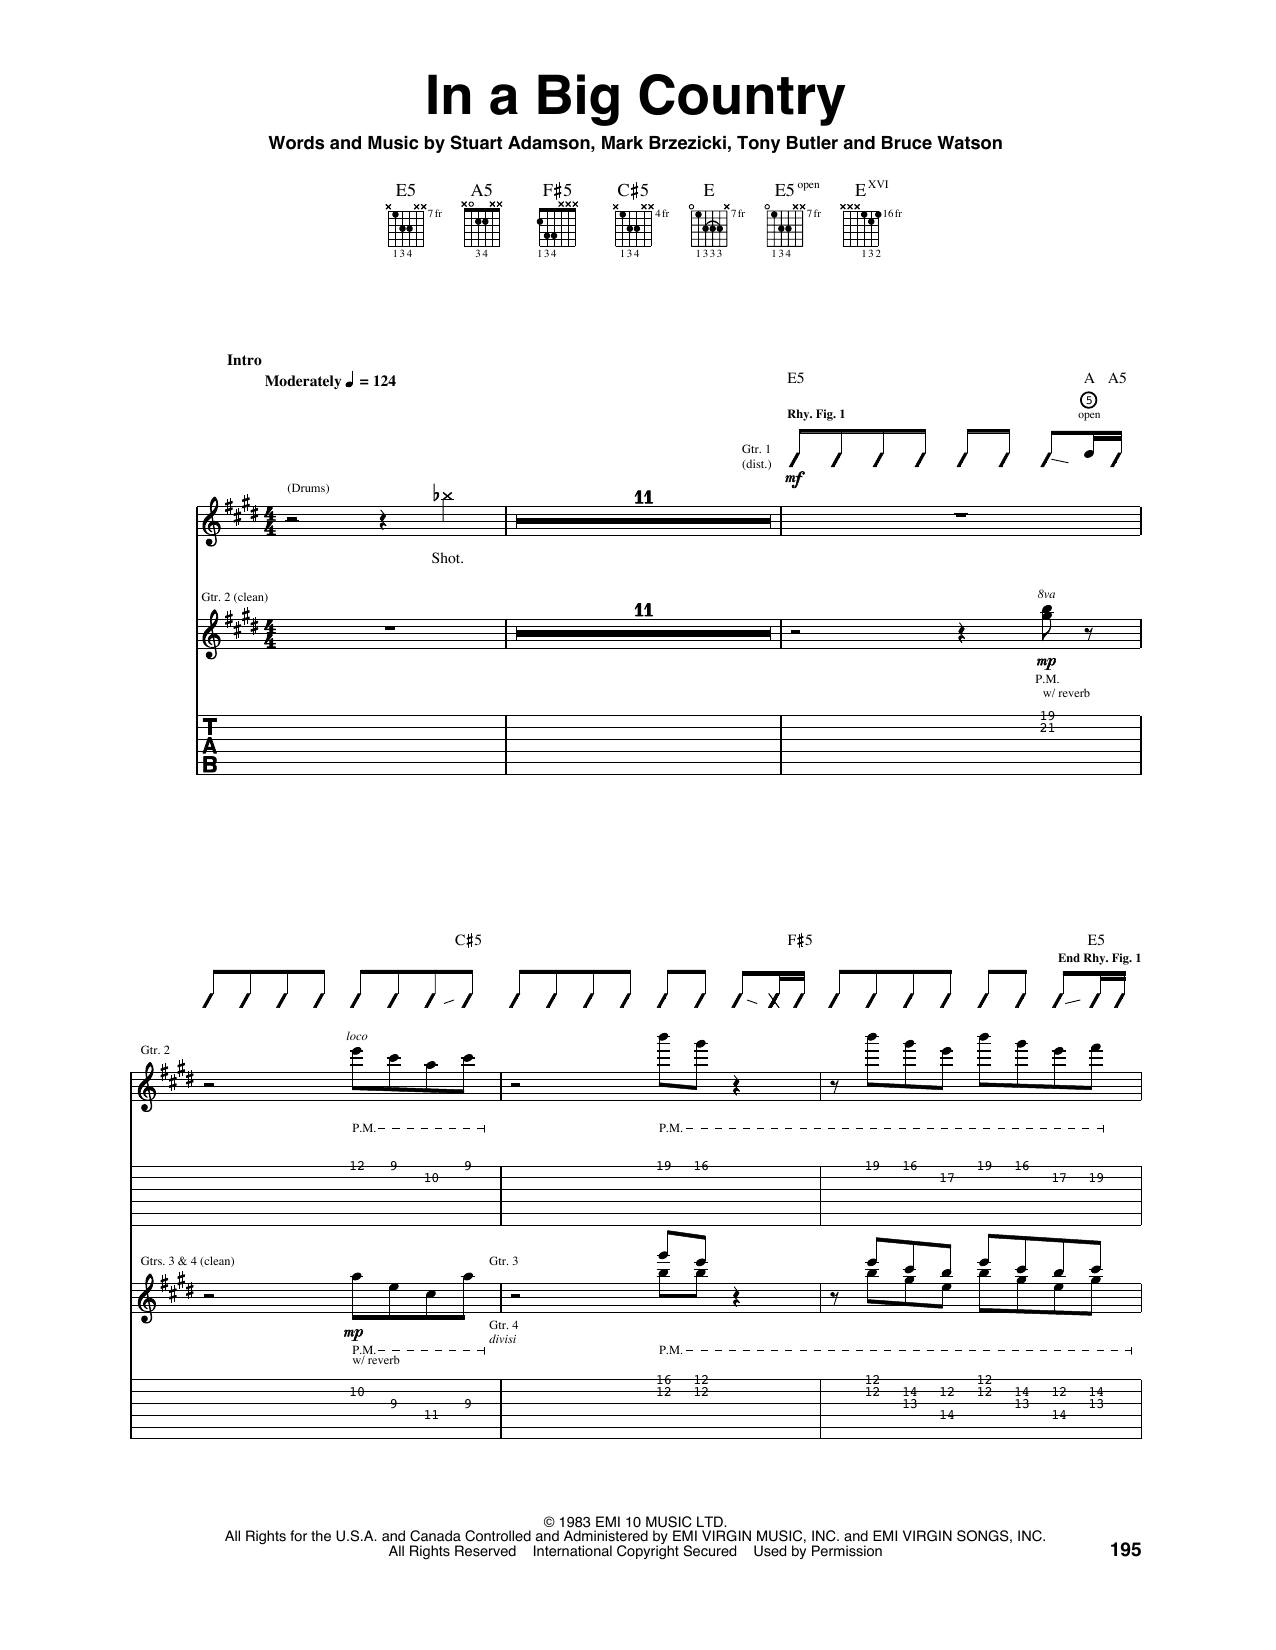 Download Big Country In A Big Country Sheet Music